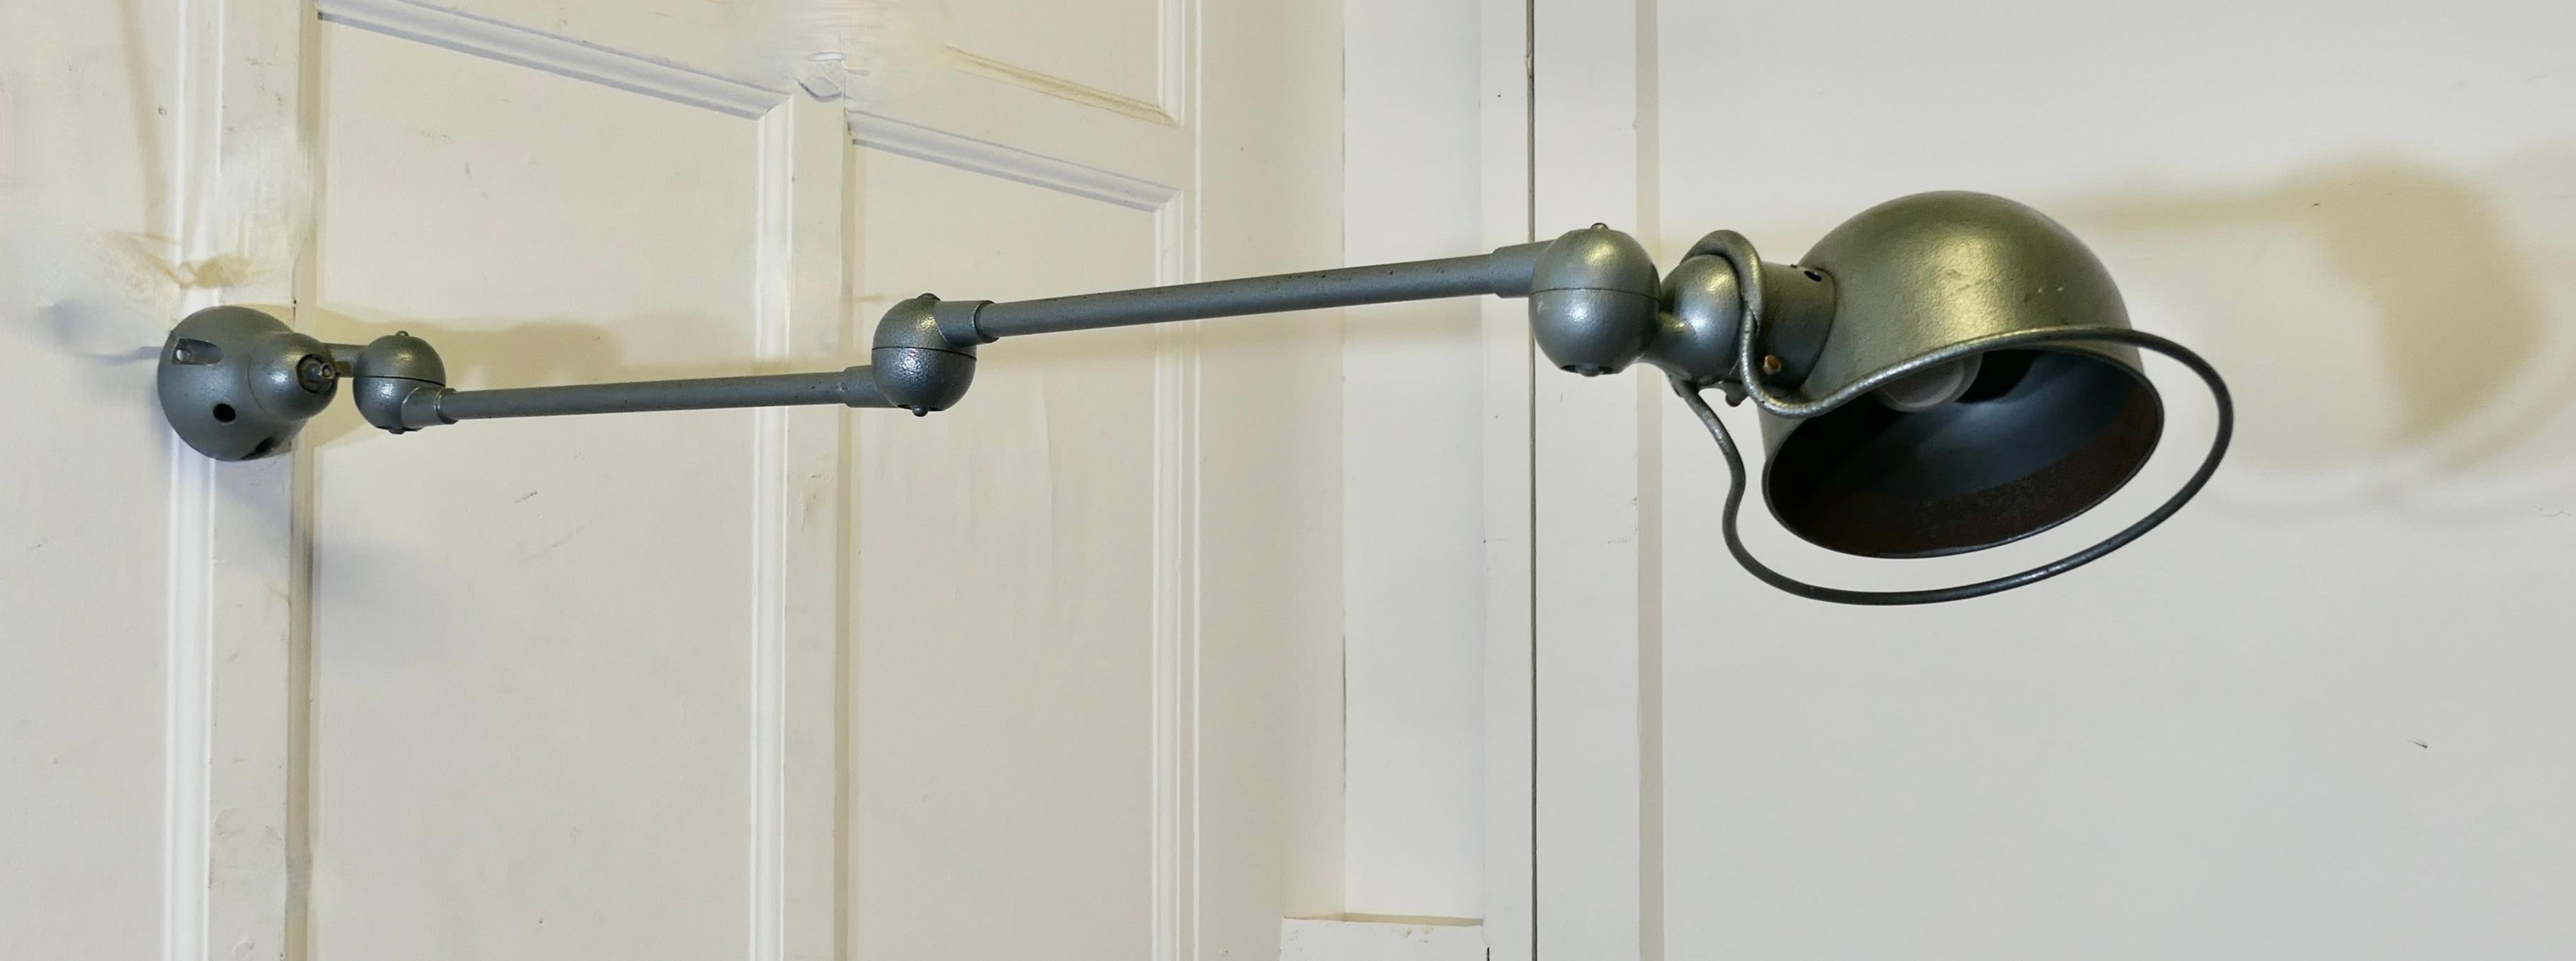 French Vintage Industrial Articulated Wall Light Sconce    For Sale 2